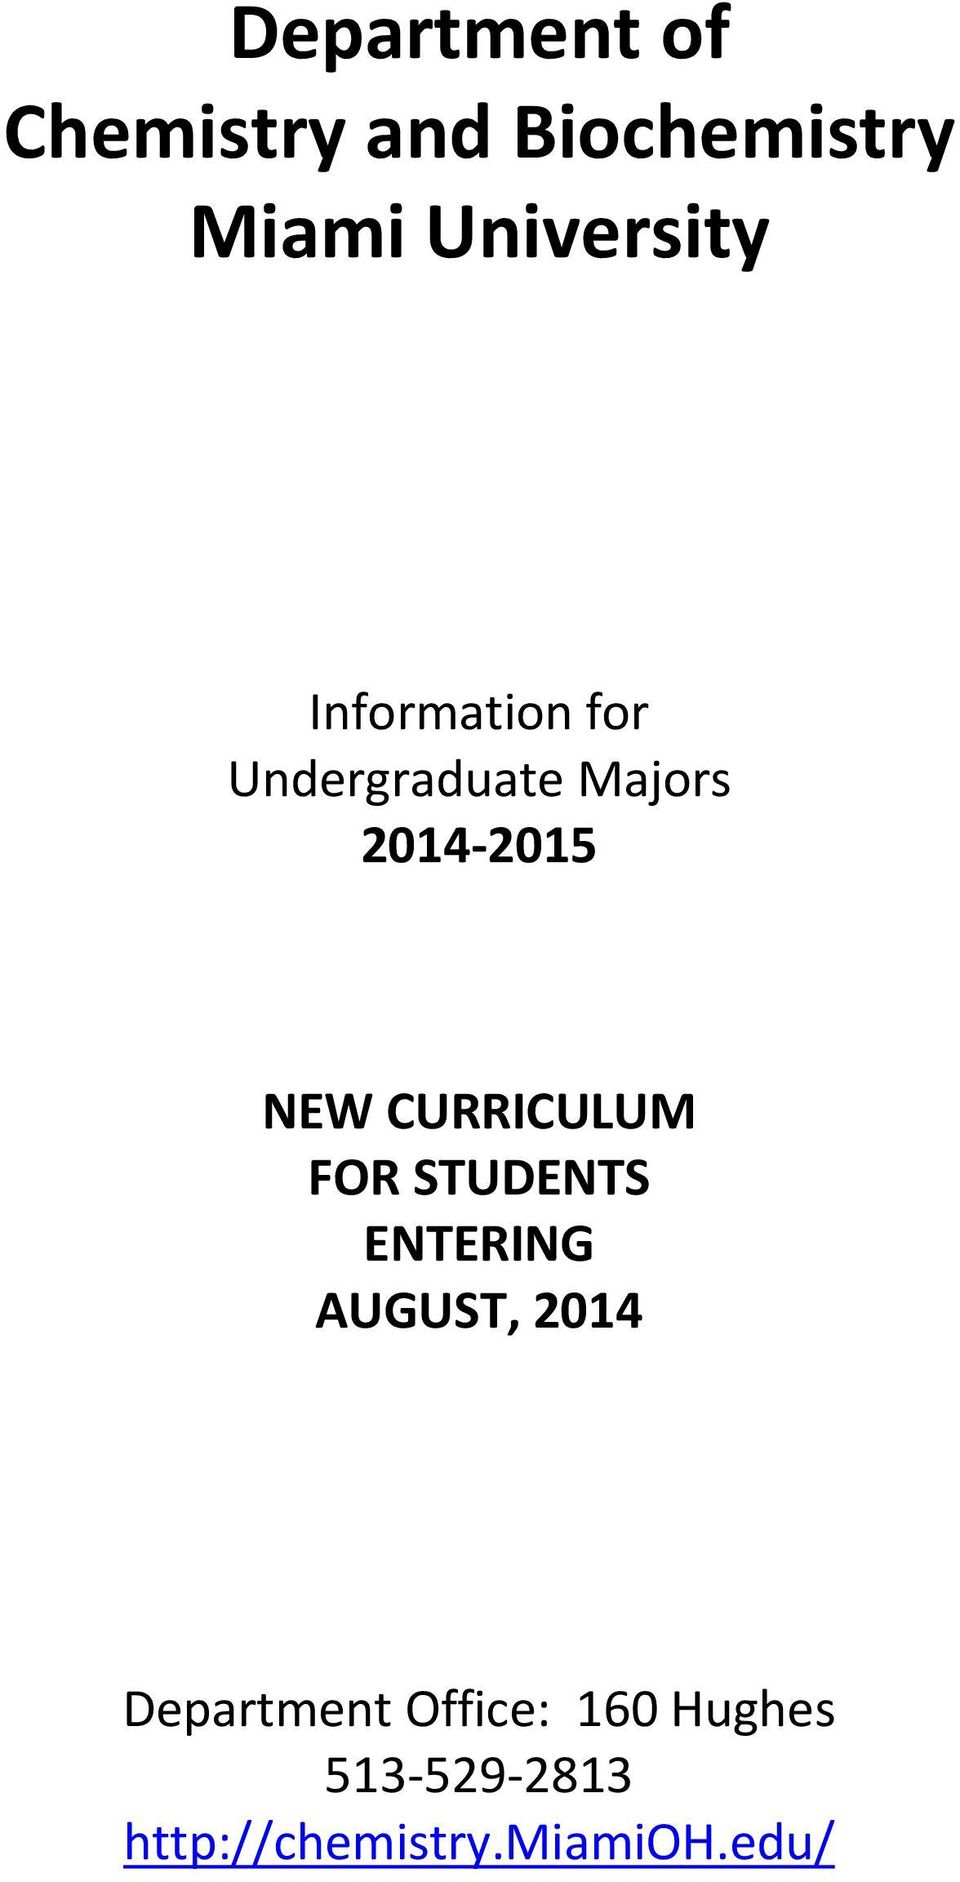 2015 NEW CURRICULUM FOR STUDENTS ENTERING AUGUST, 2014